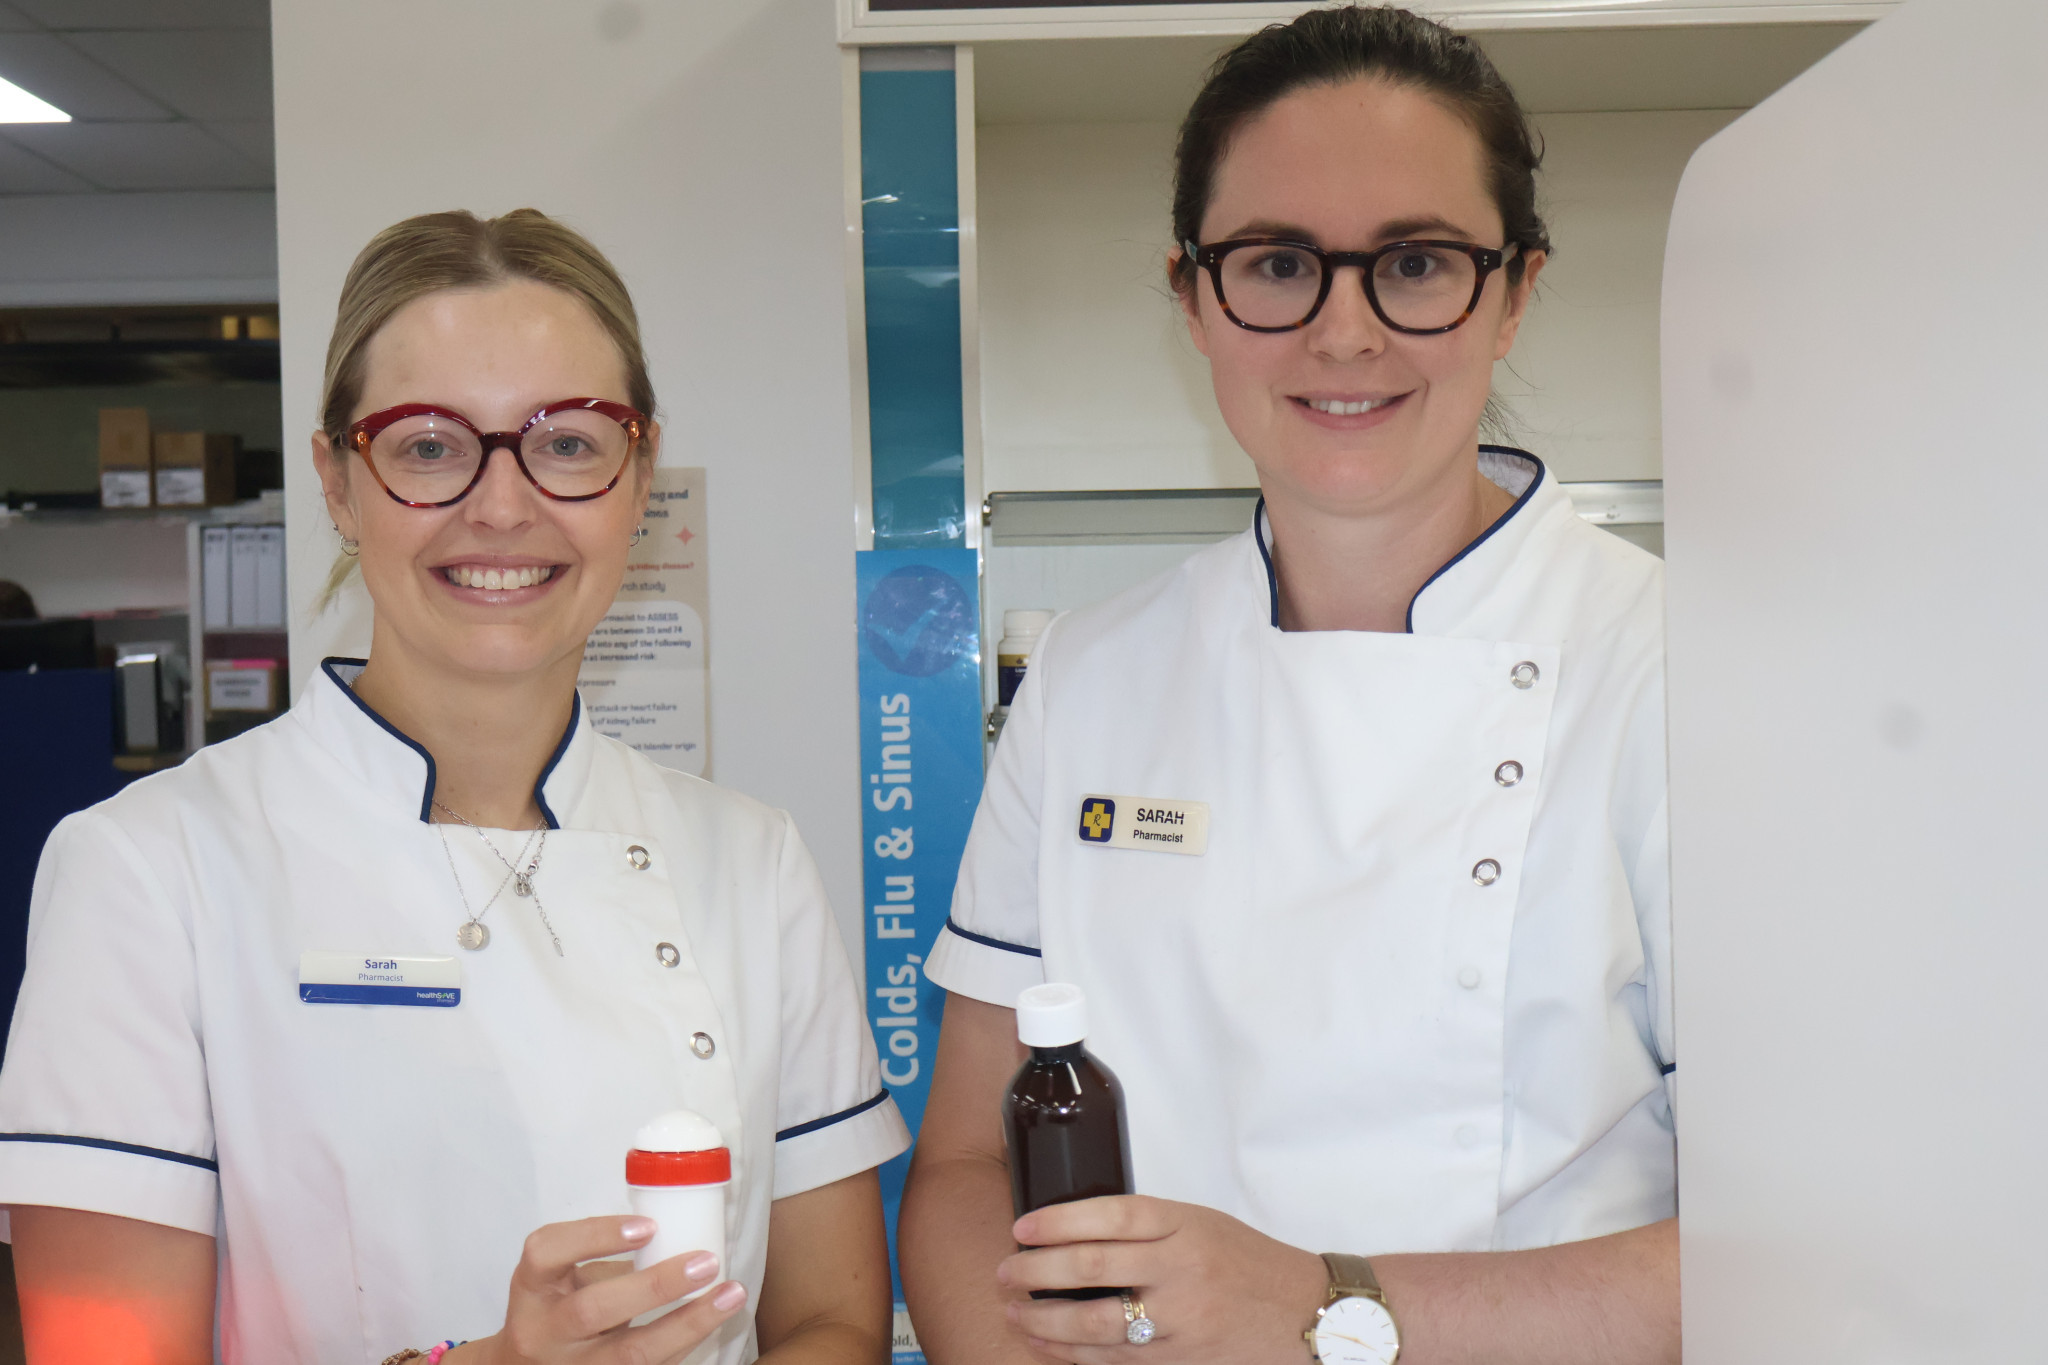 Adjusting for the community’s needs: Camperdown’s Healthsave Pharmacy will offer medicine compounding services to the community, a first for the Corangamite Shire.